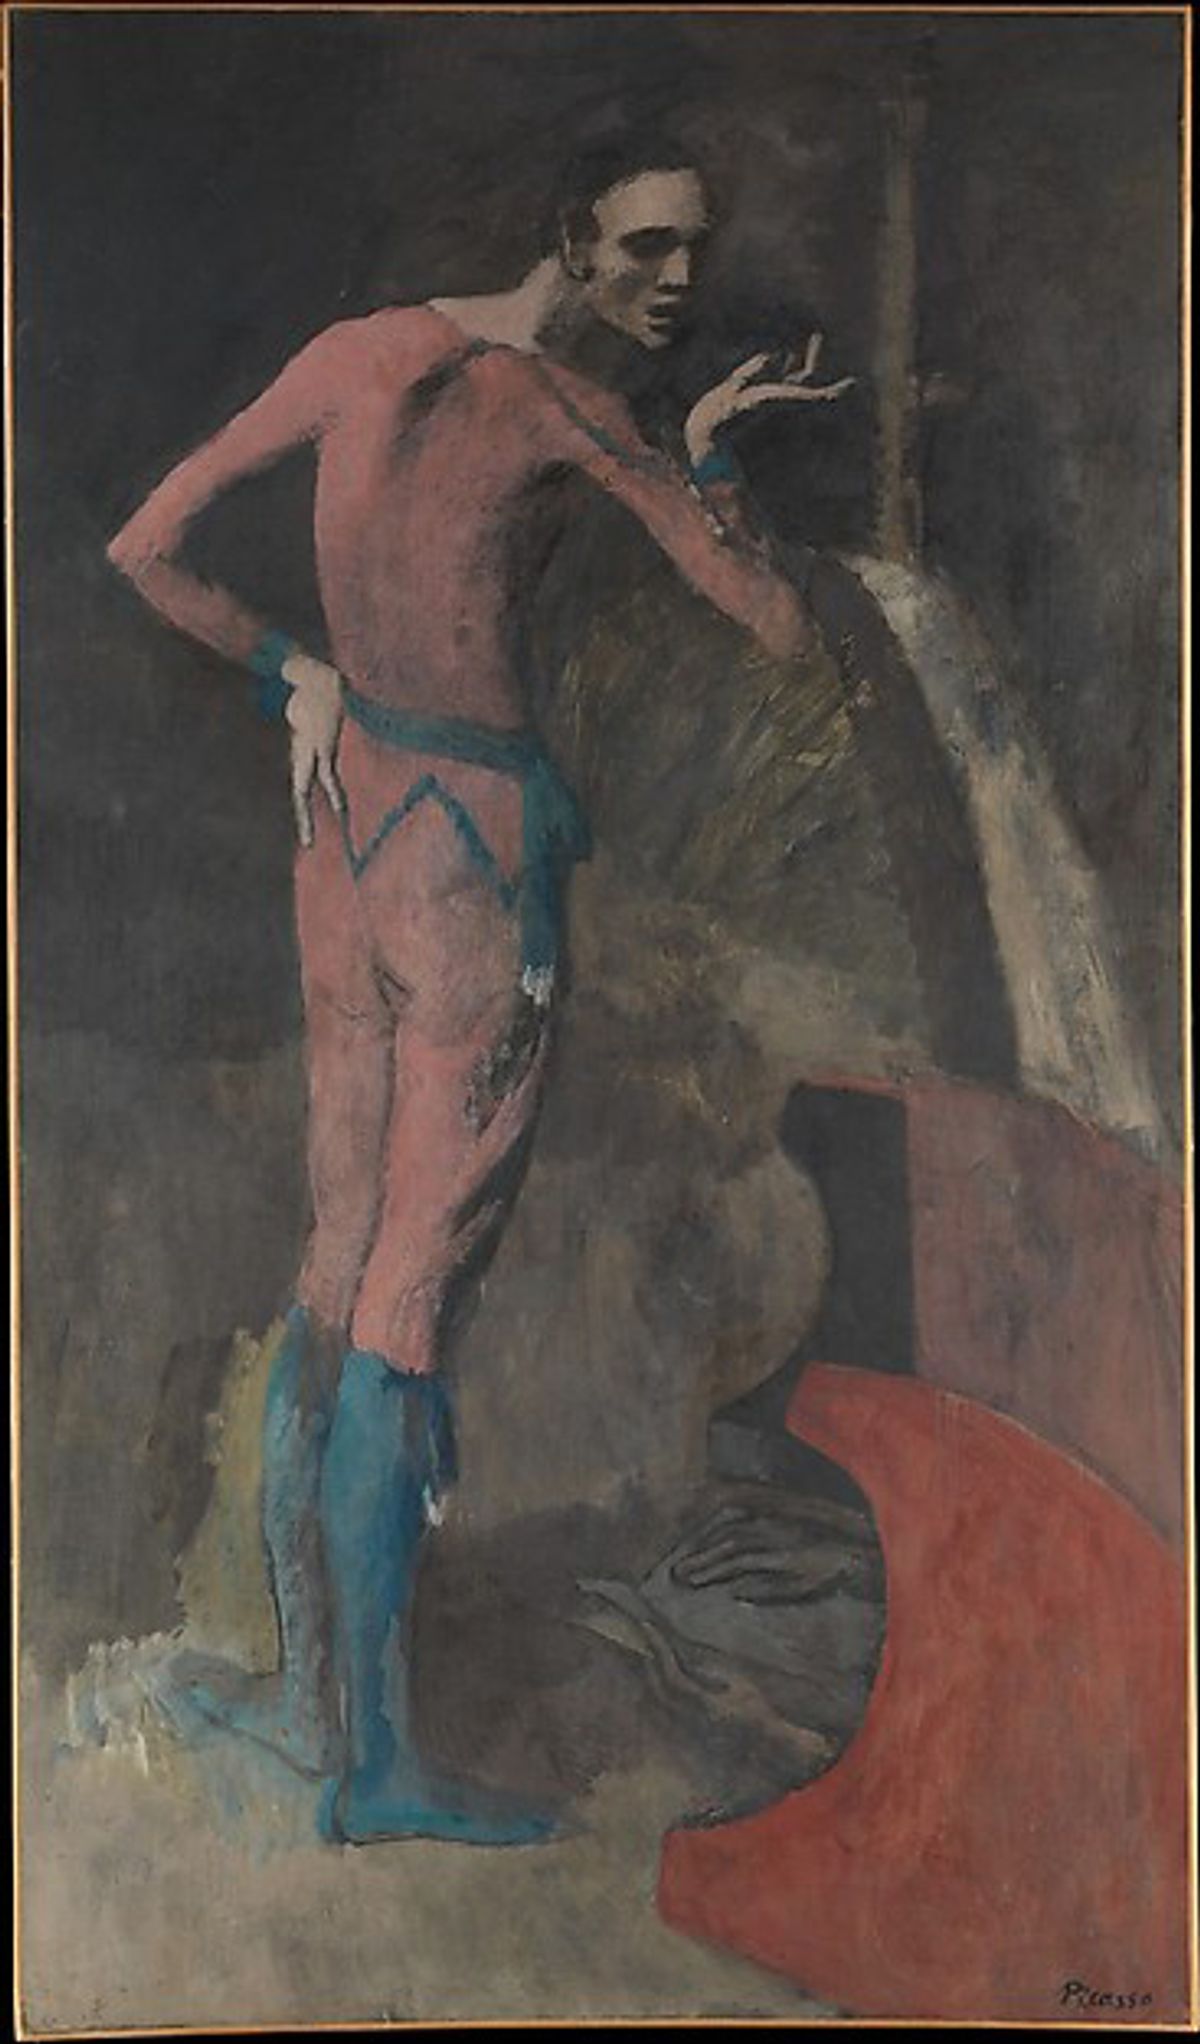 Pablo Picasso, The Actor, (1904-05), gift of Thelma Chrysler Foy, 1952 Estate of Pablo Picasso / Artists Rights Society (ARS), New York